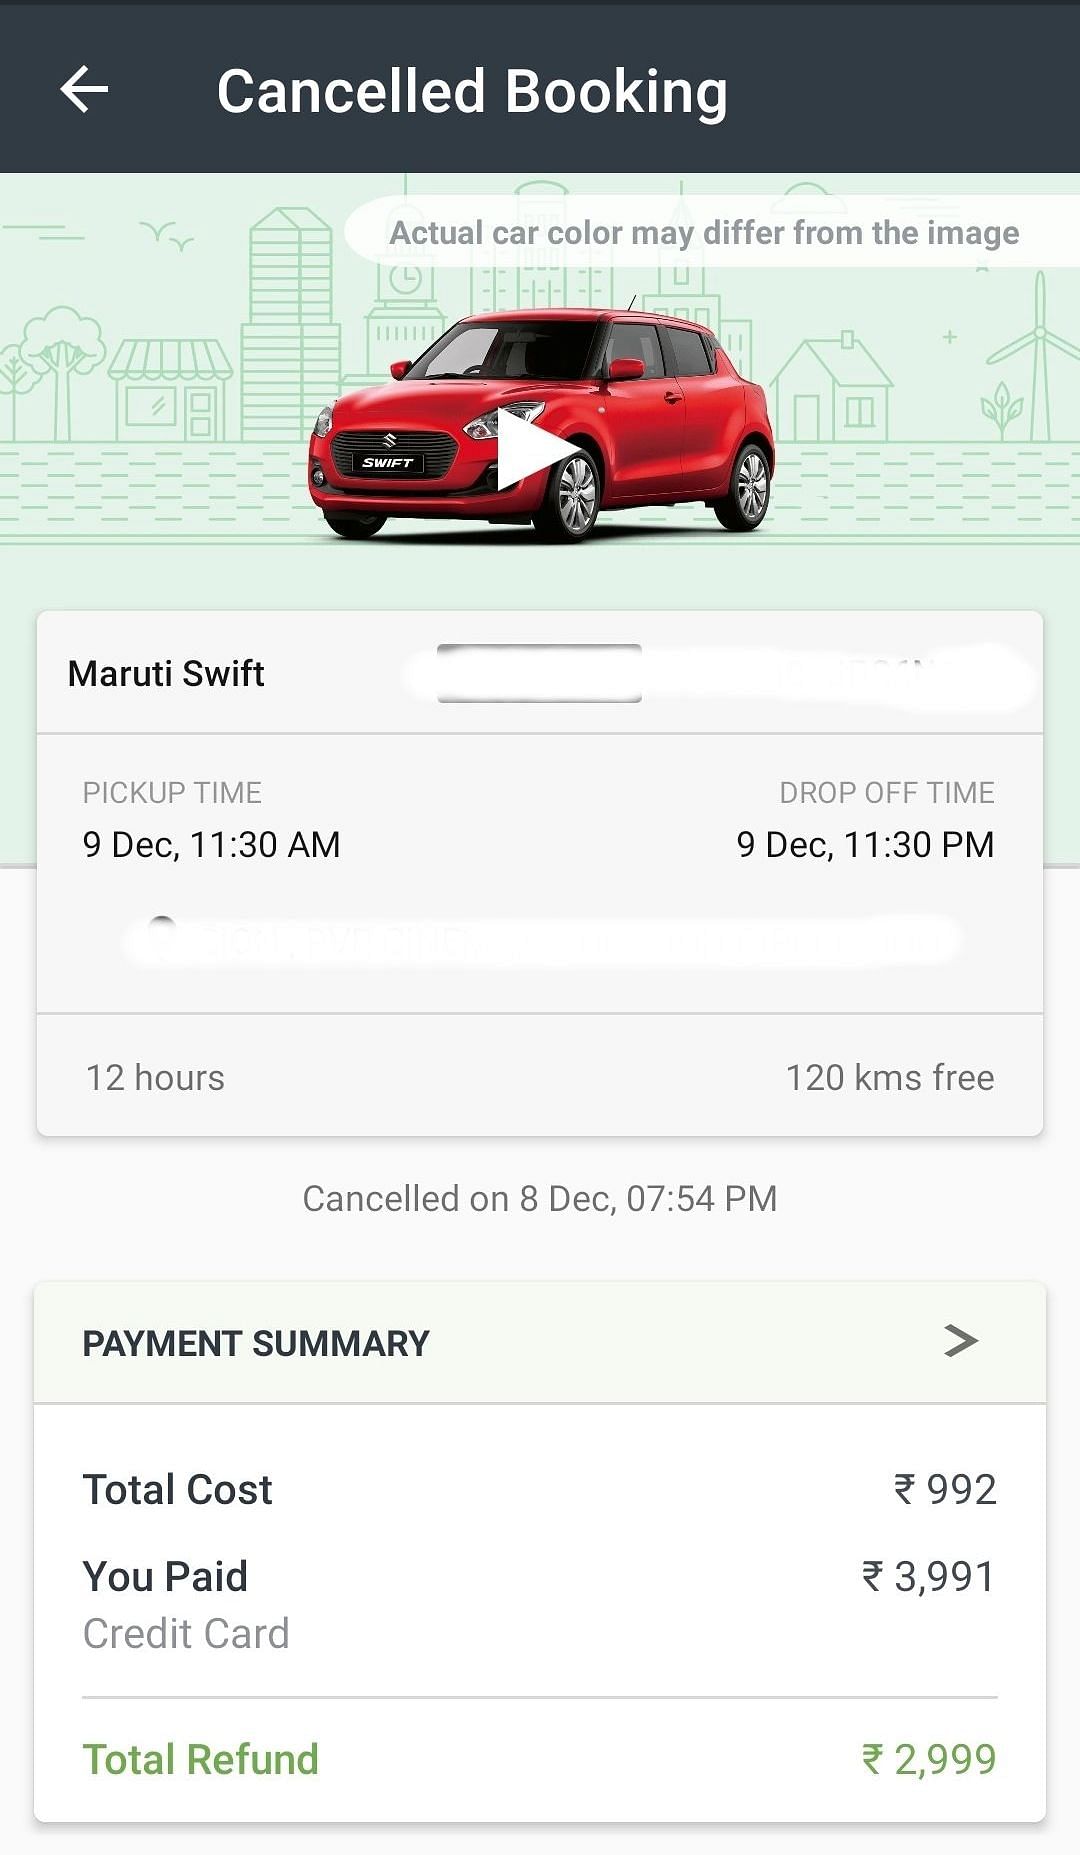 Tohid Shaikh, from Mumbai, has been trying to get a refund on the deposit made to Zoomcar since December 2020.